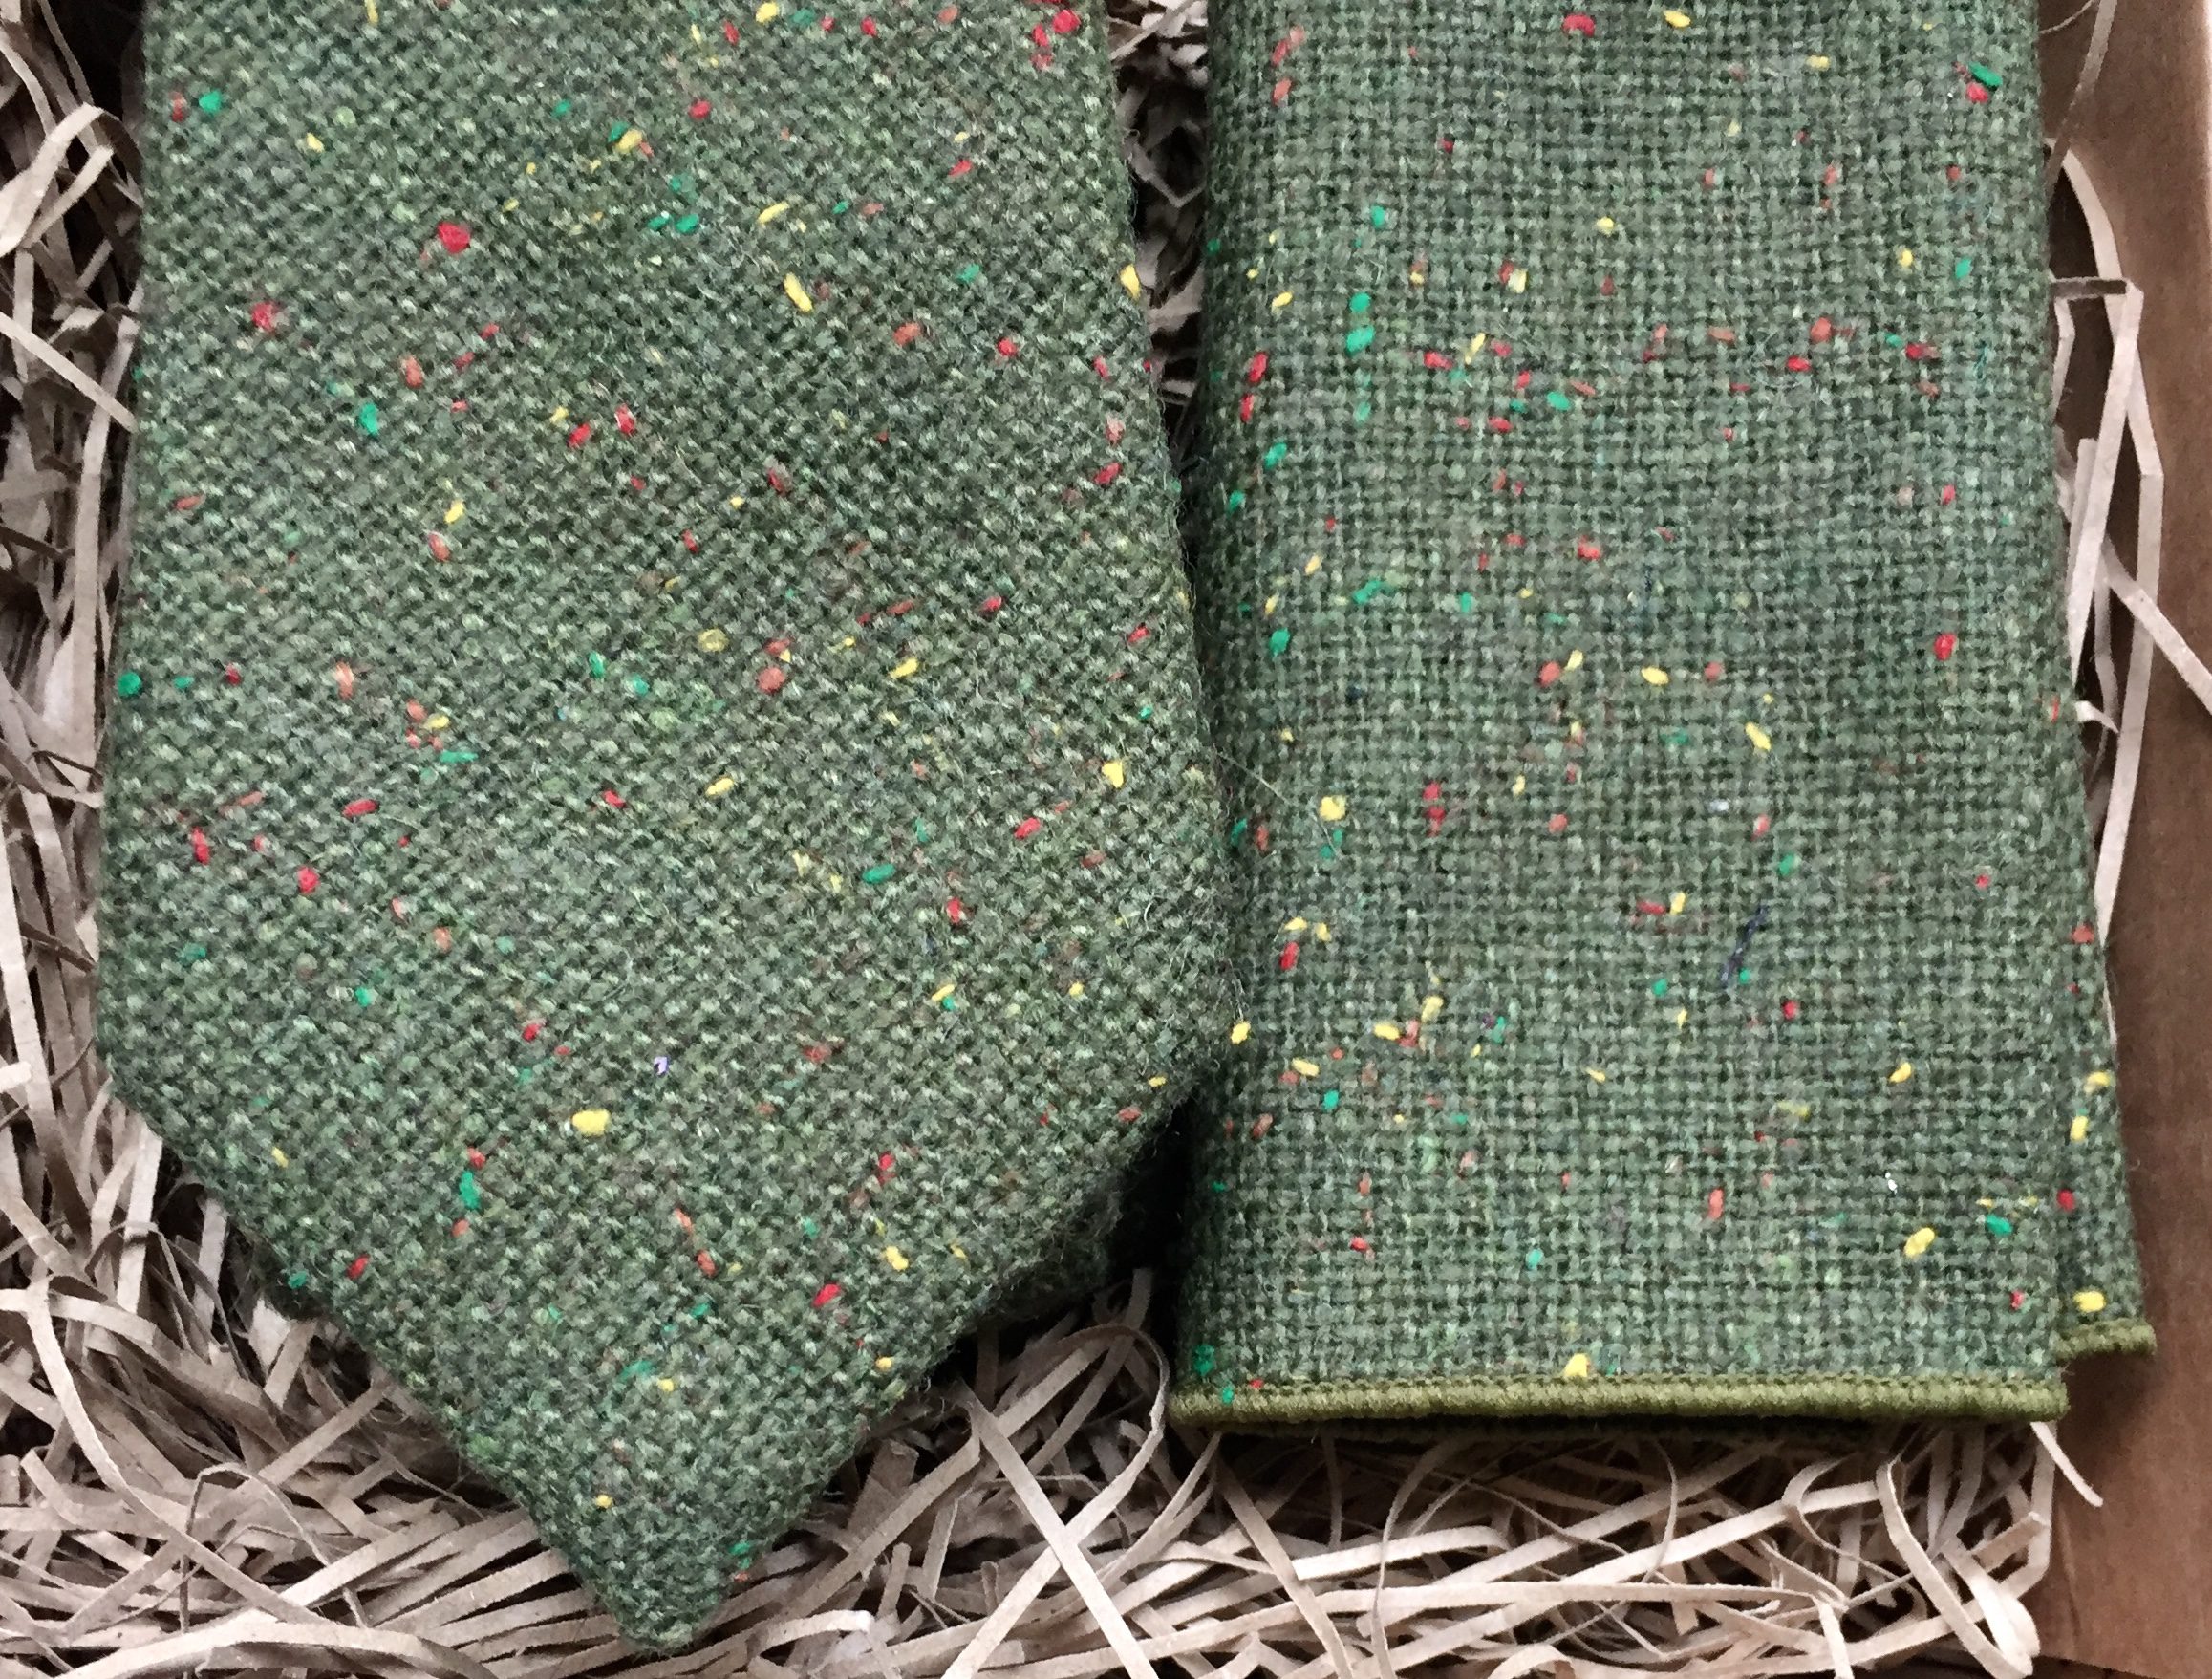 A photo of a moss green men's wool tie and pocket square set